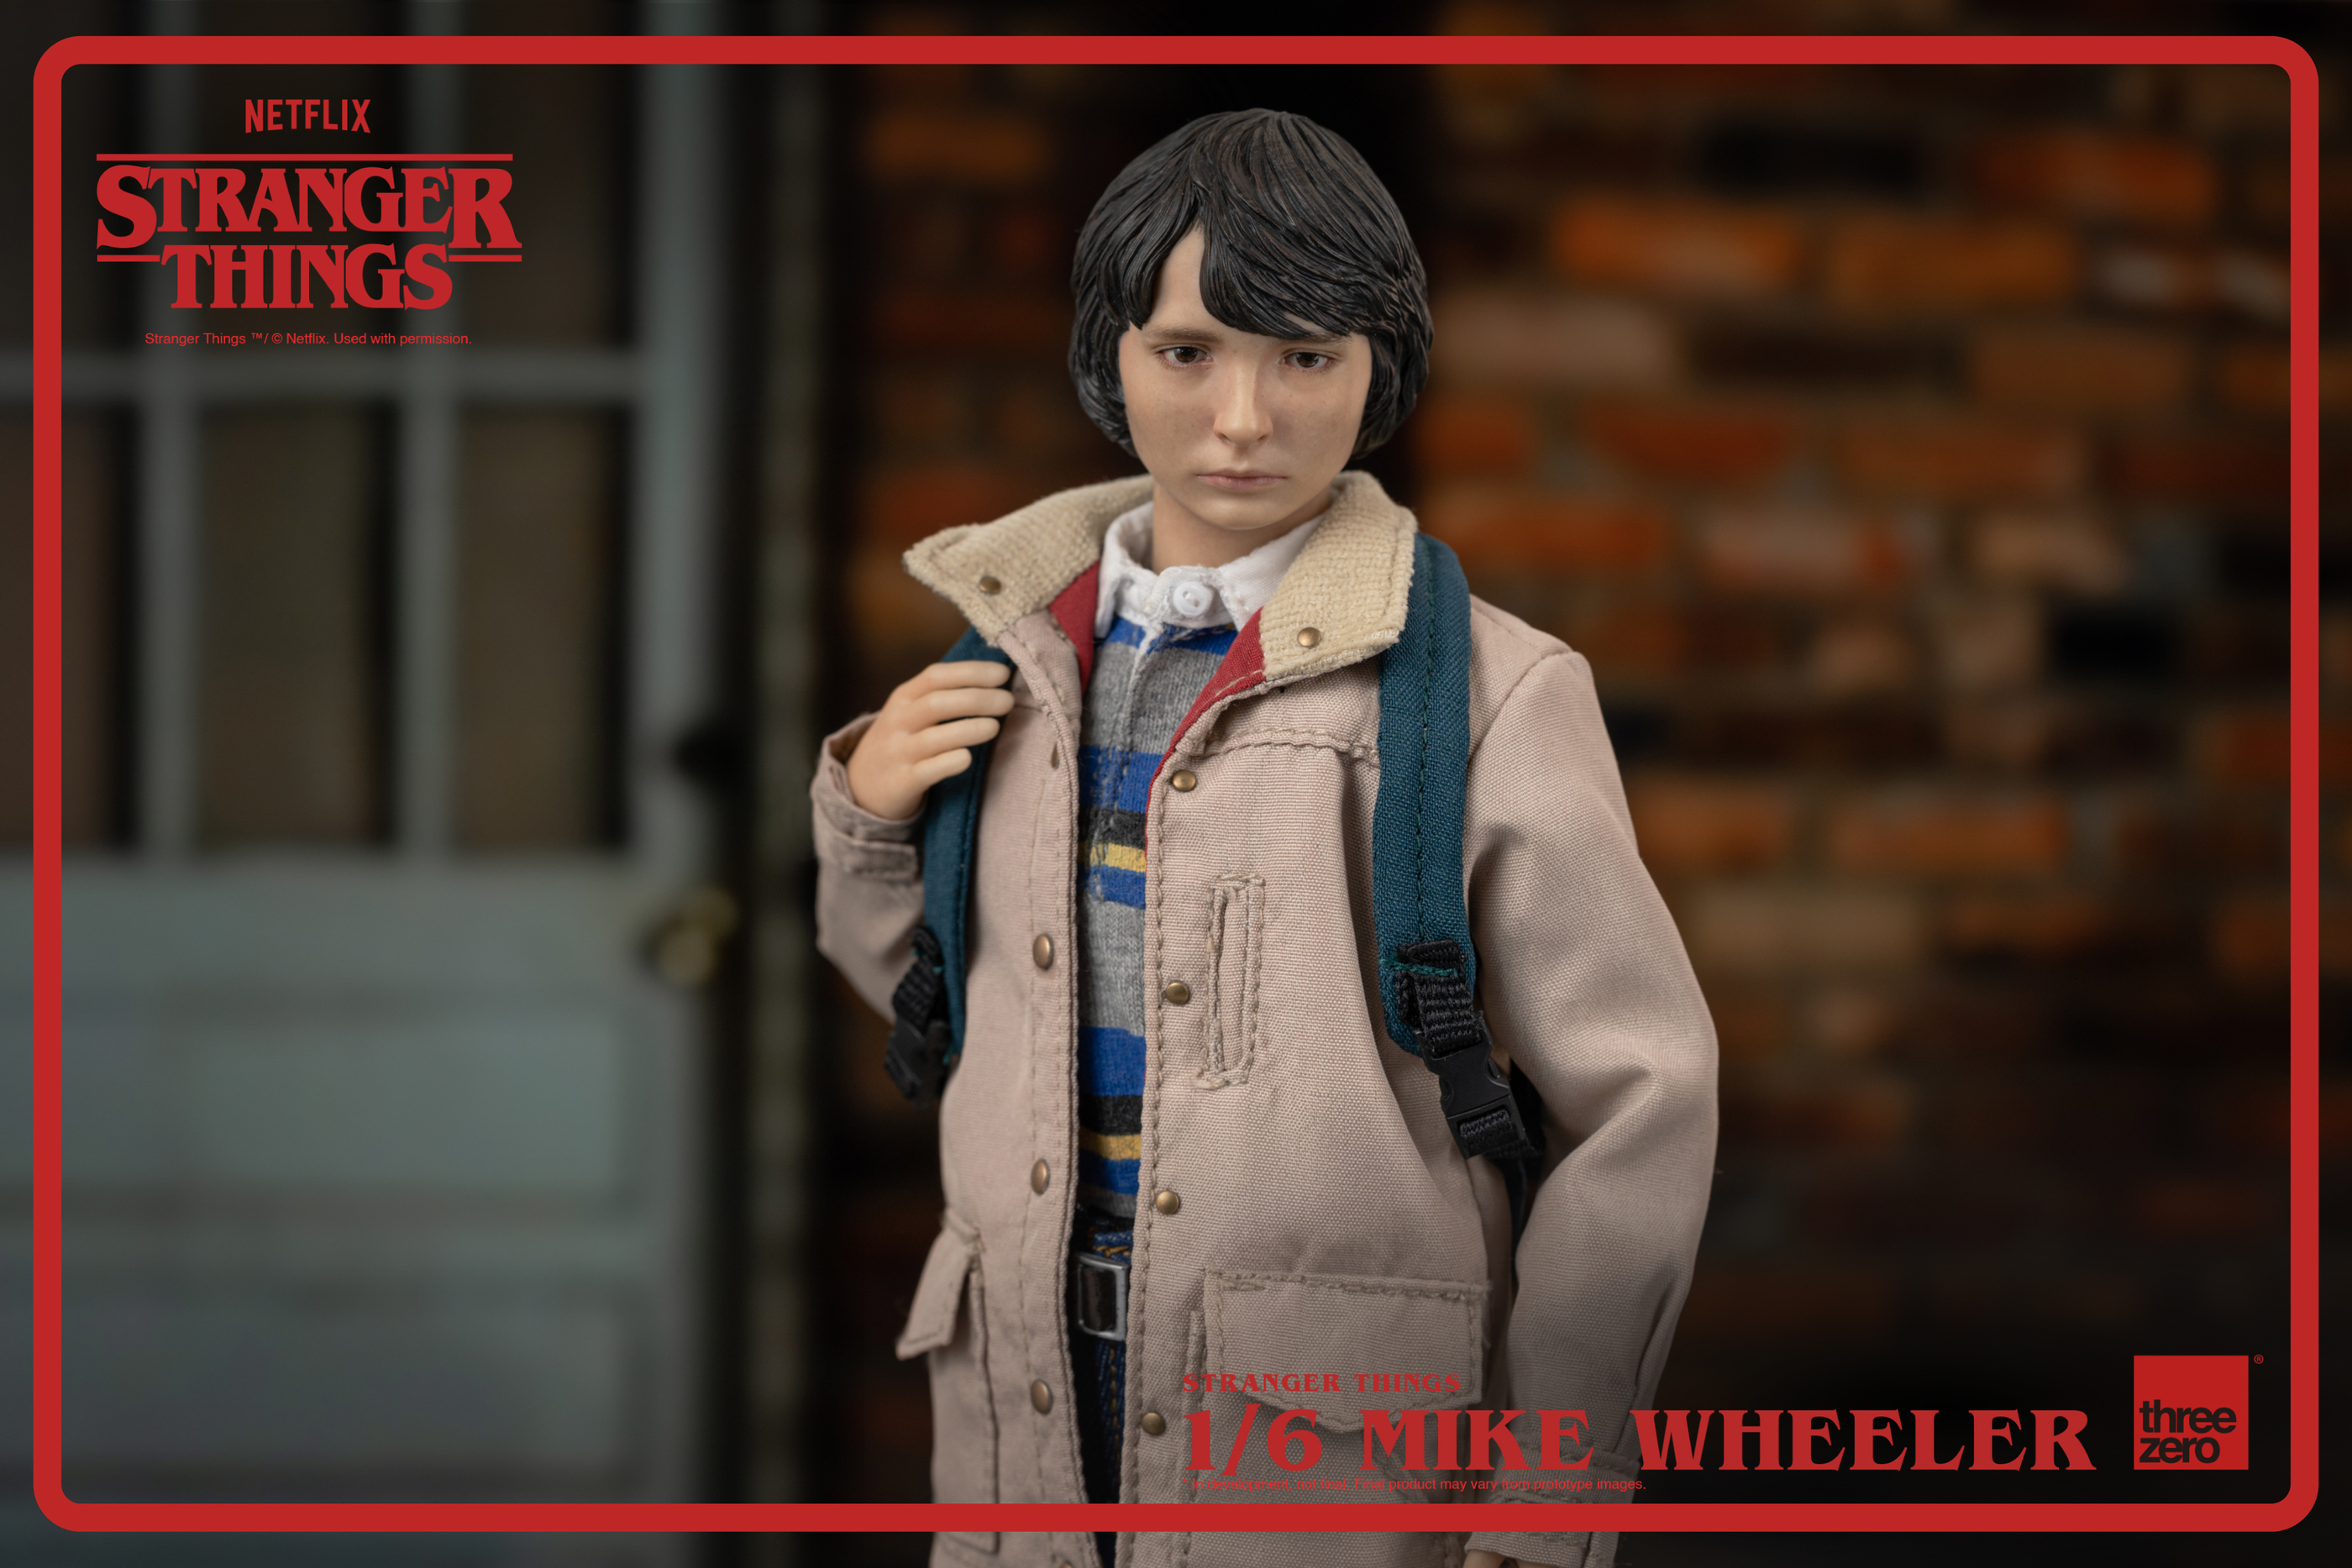 JAN238747 - STRANGER THINGS WILL BYERS 1/6 SCALE FIG - Previews World